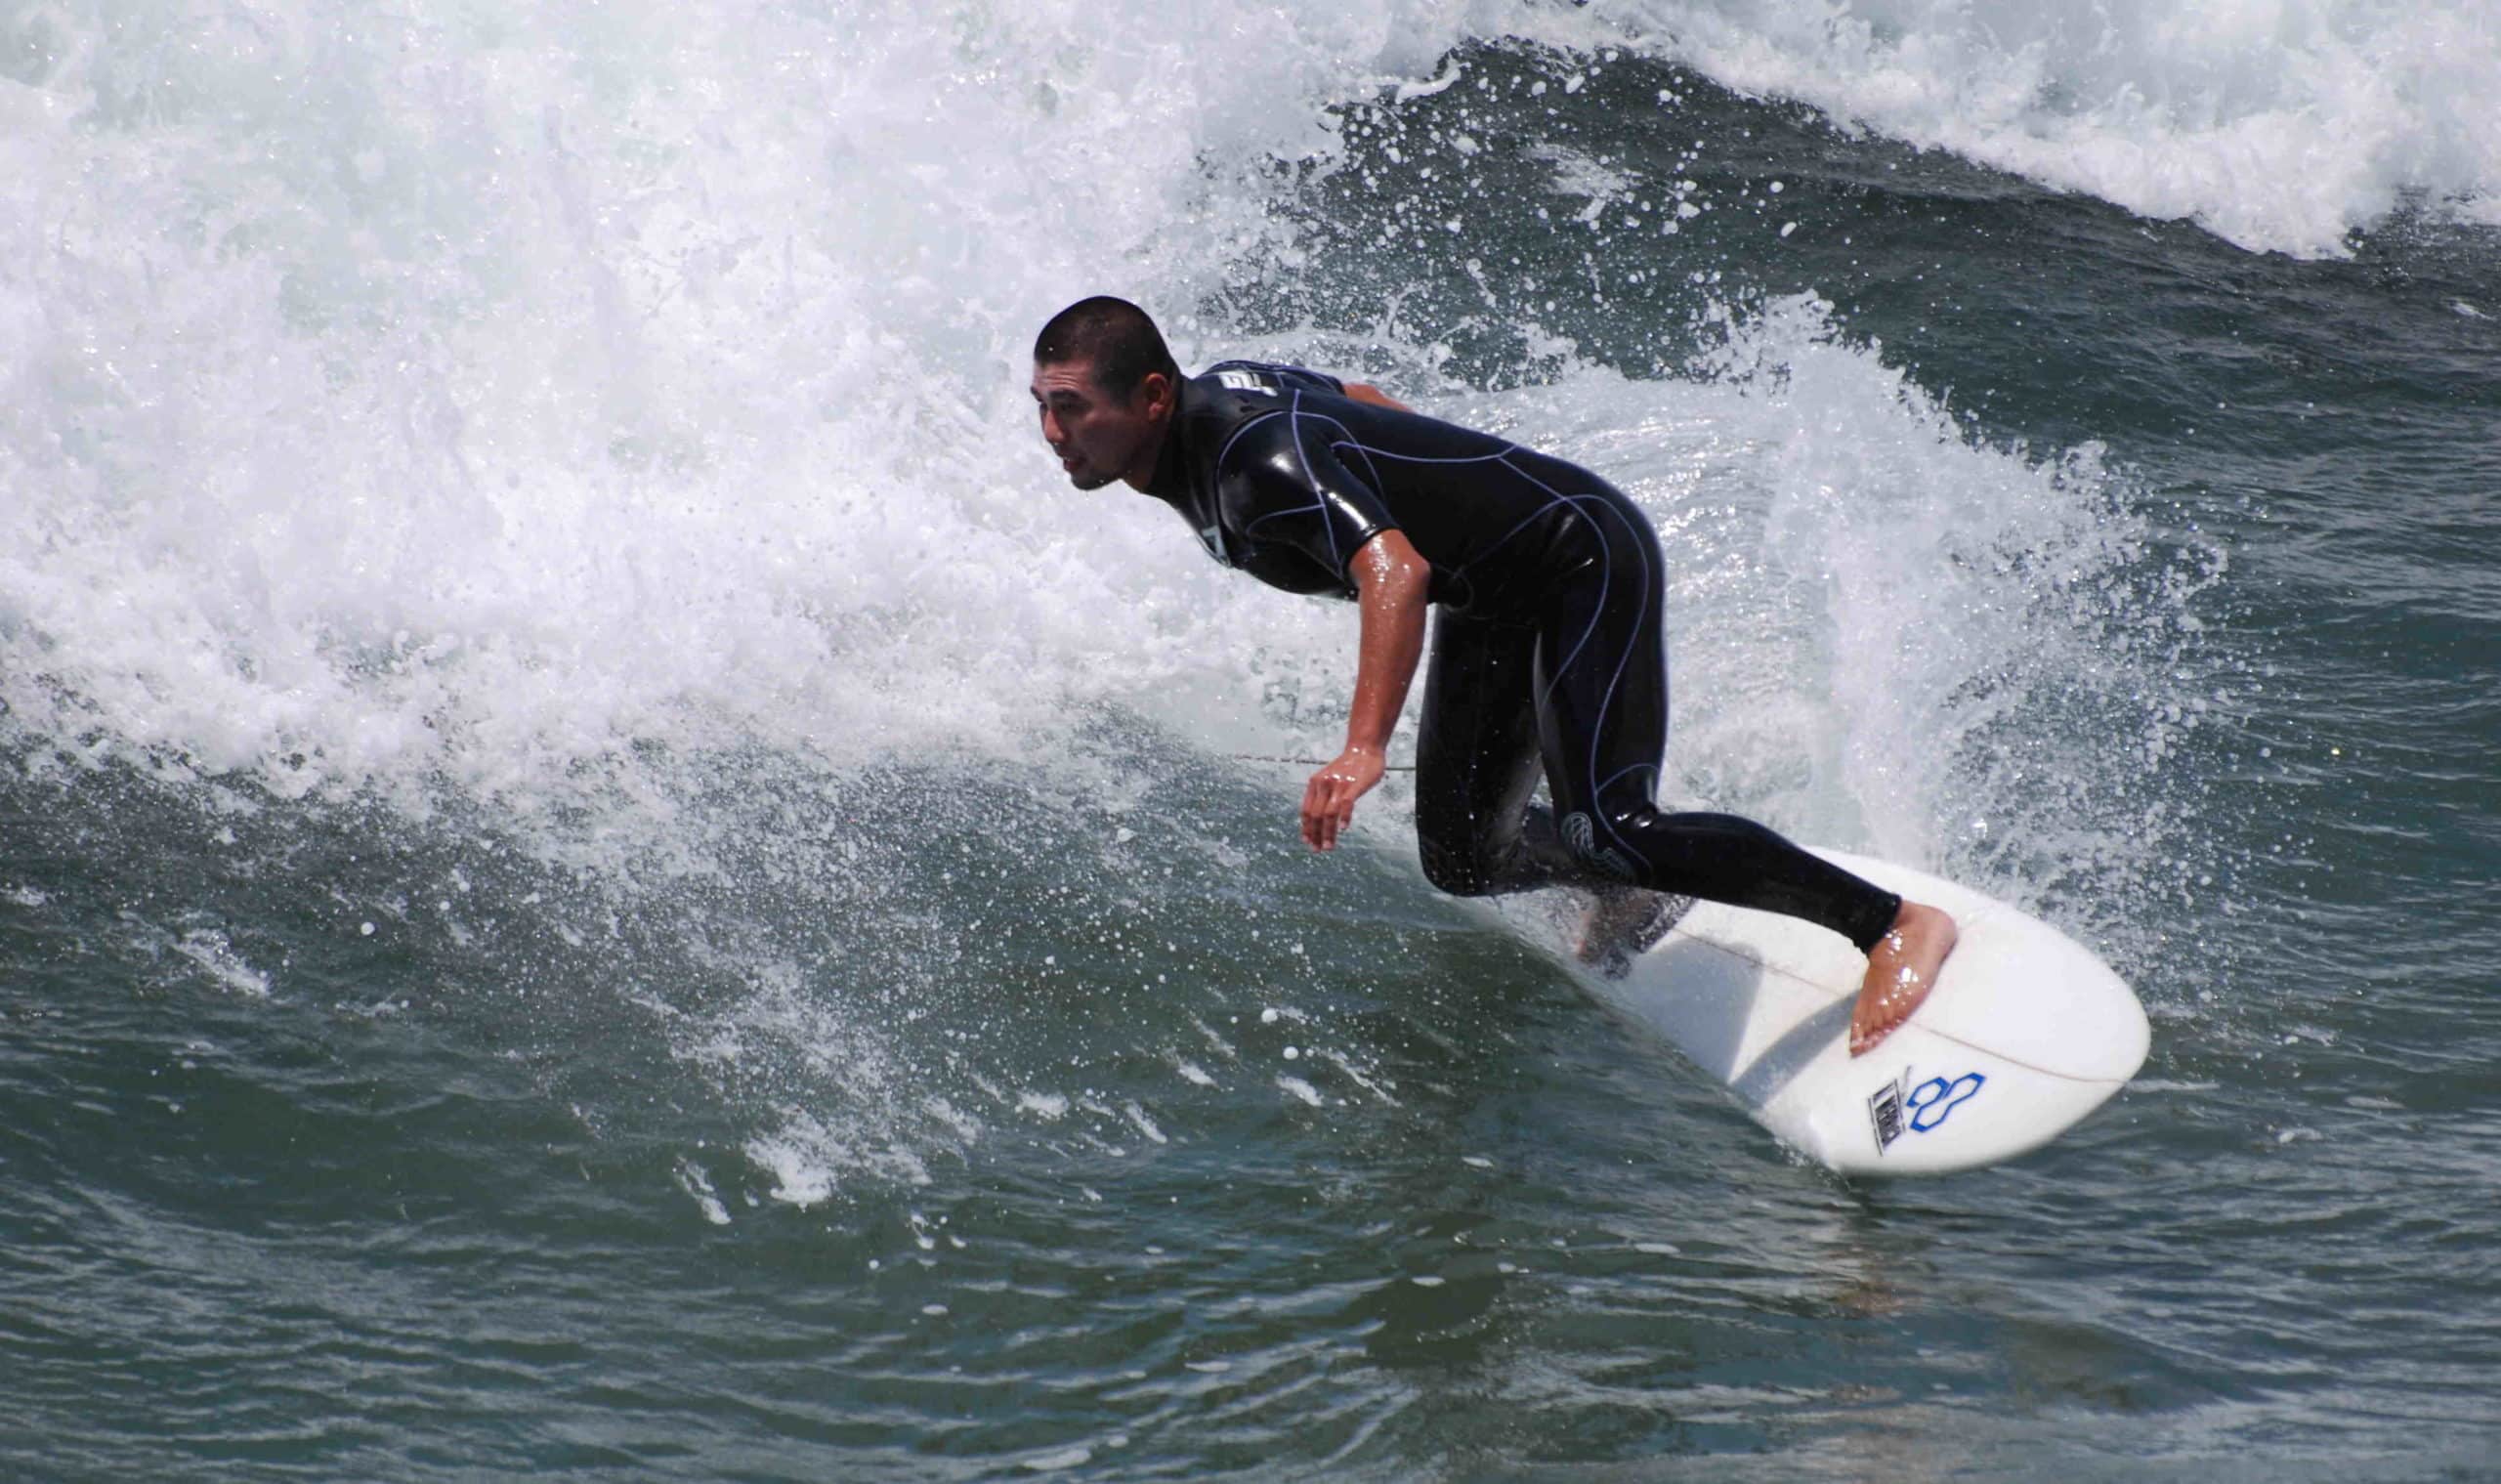 How fit do you need to be to surf?